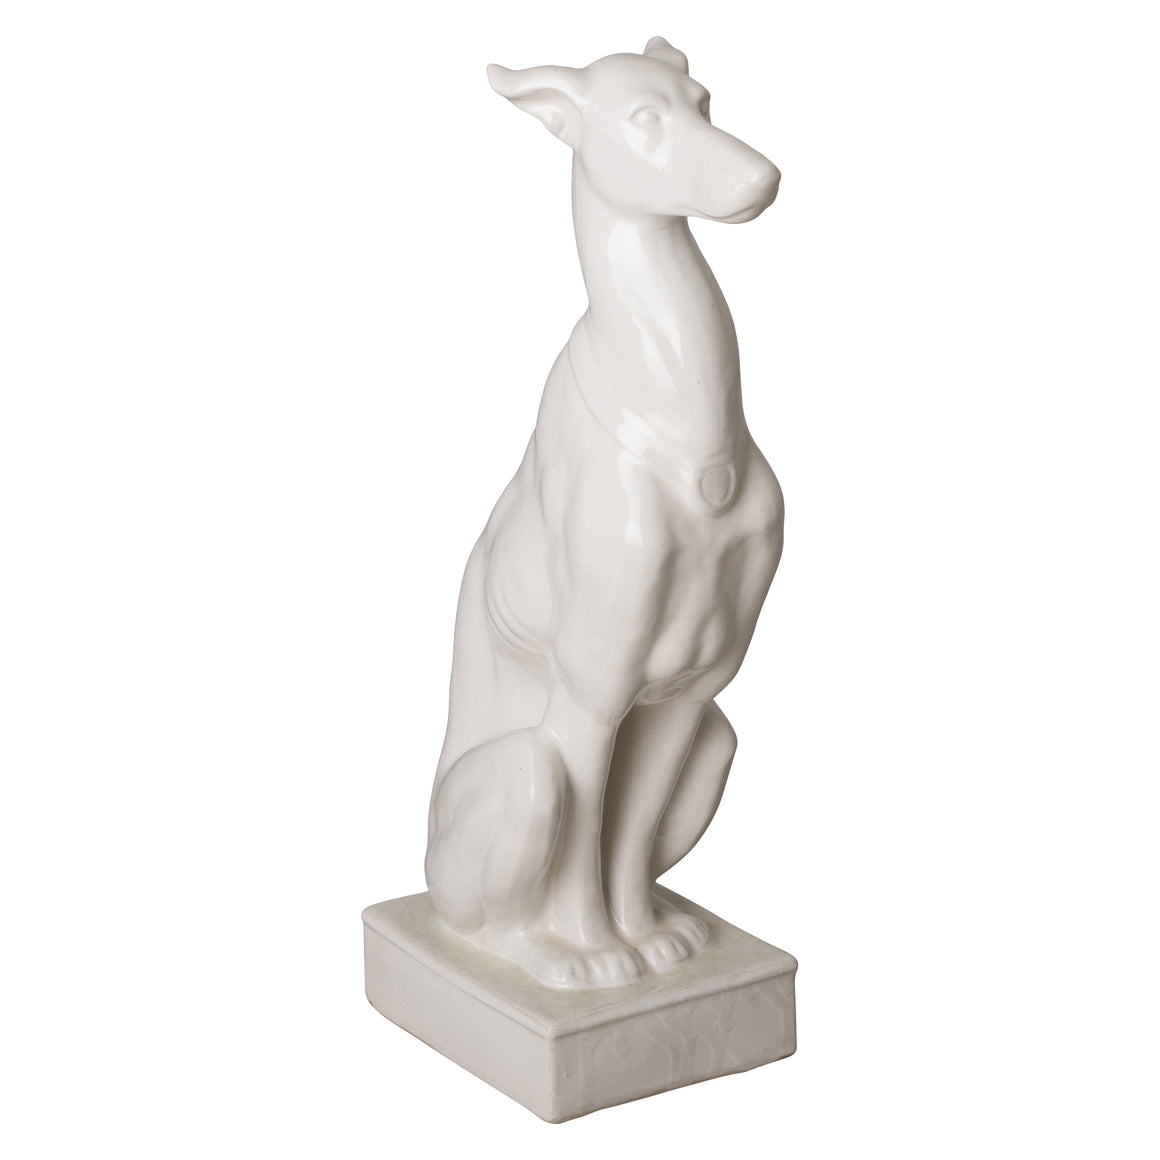 Whippet Statue with a Distressed Crackle Glaze